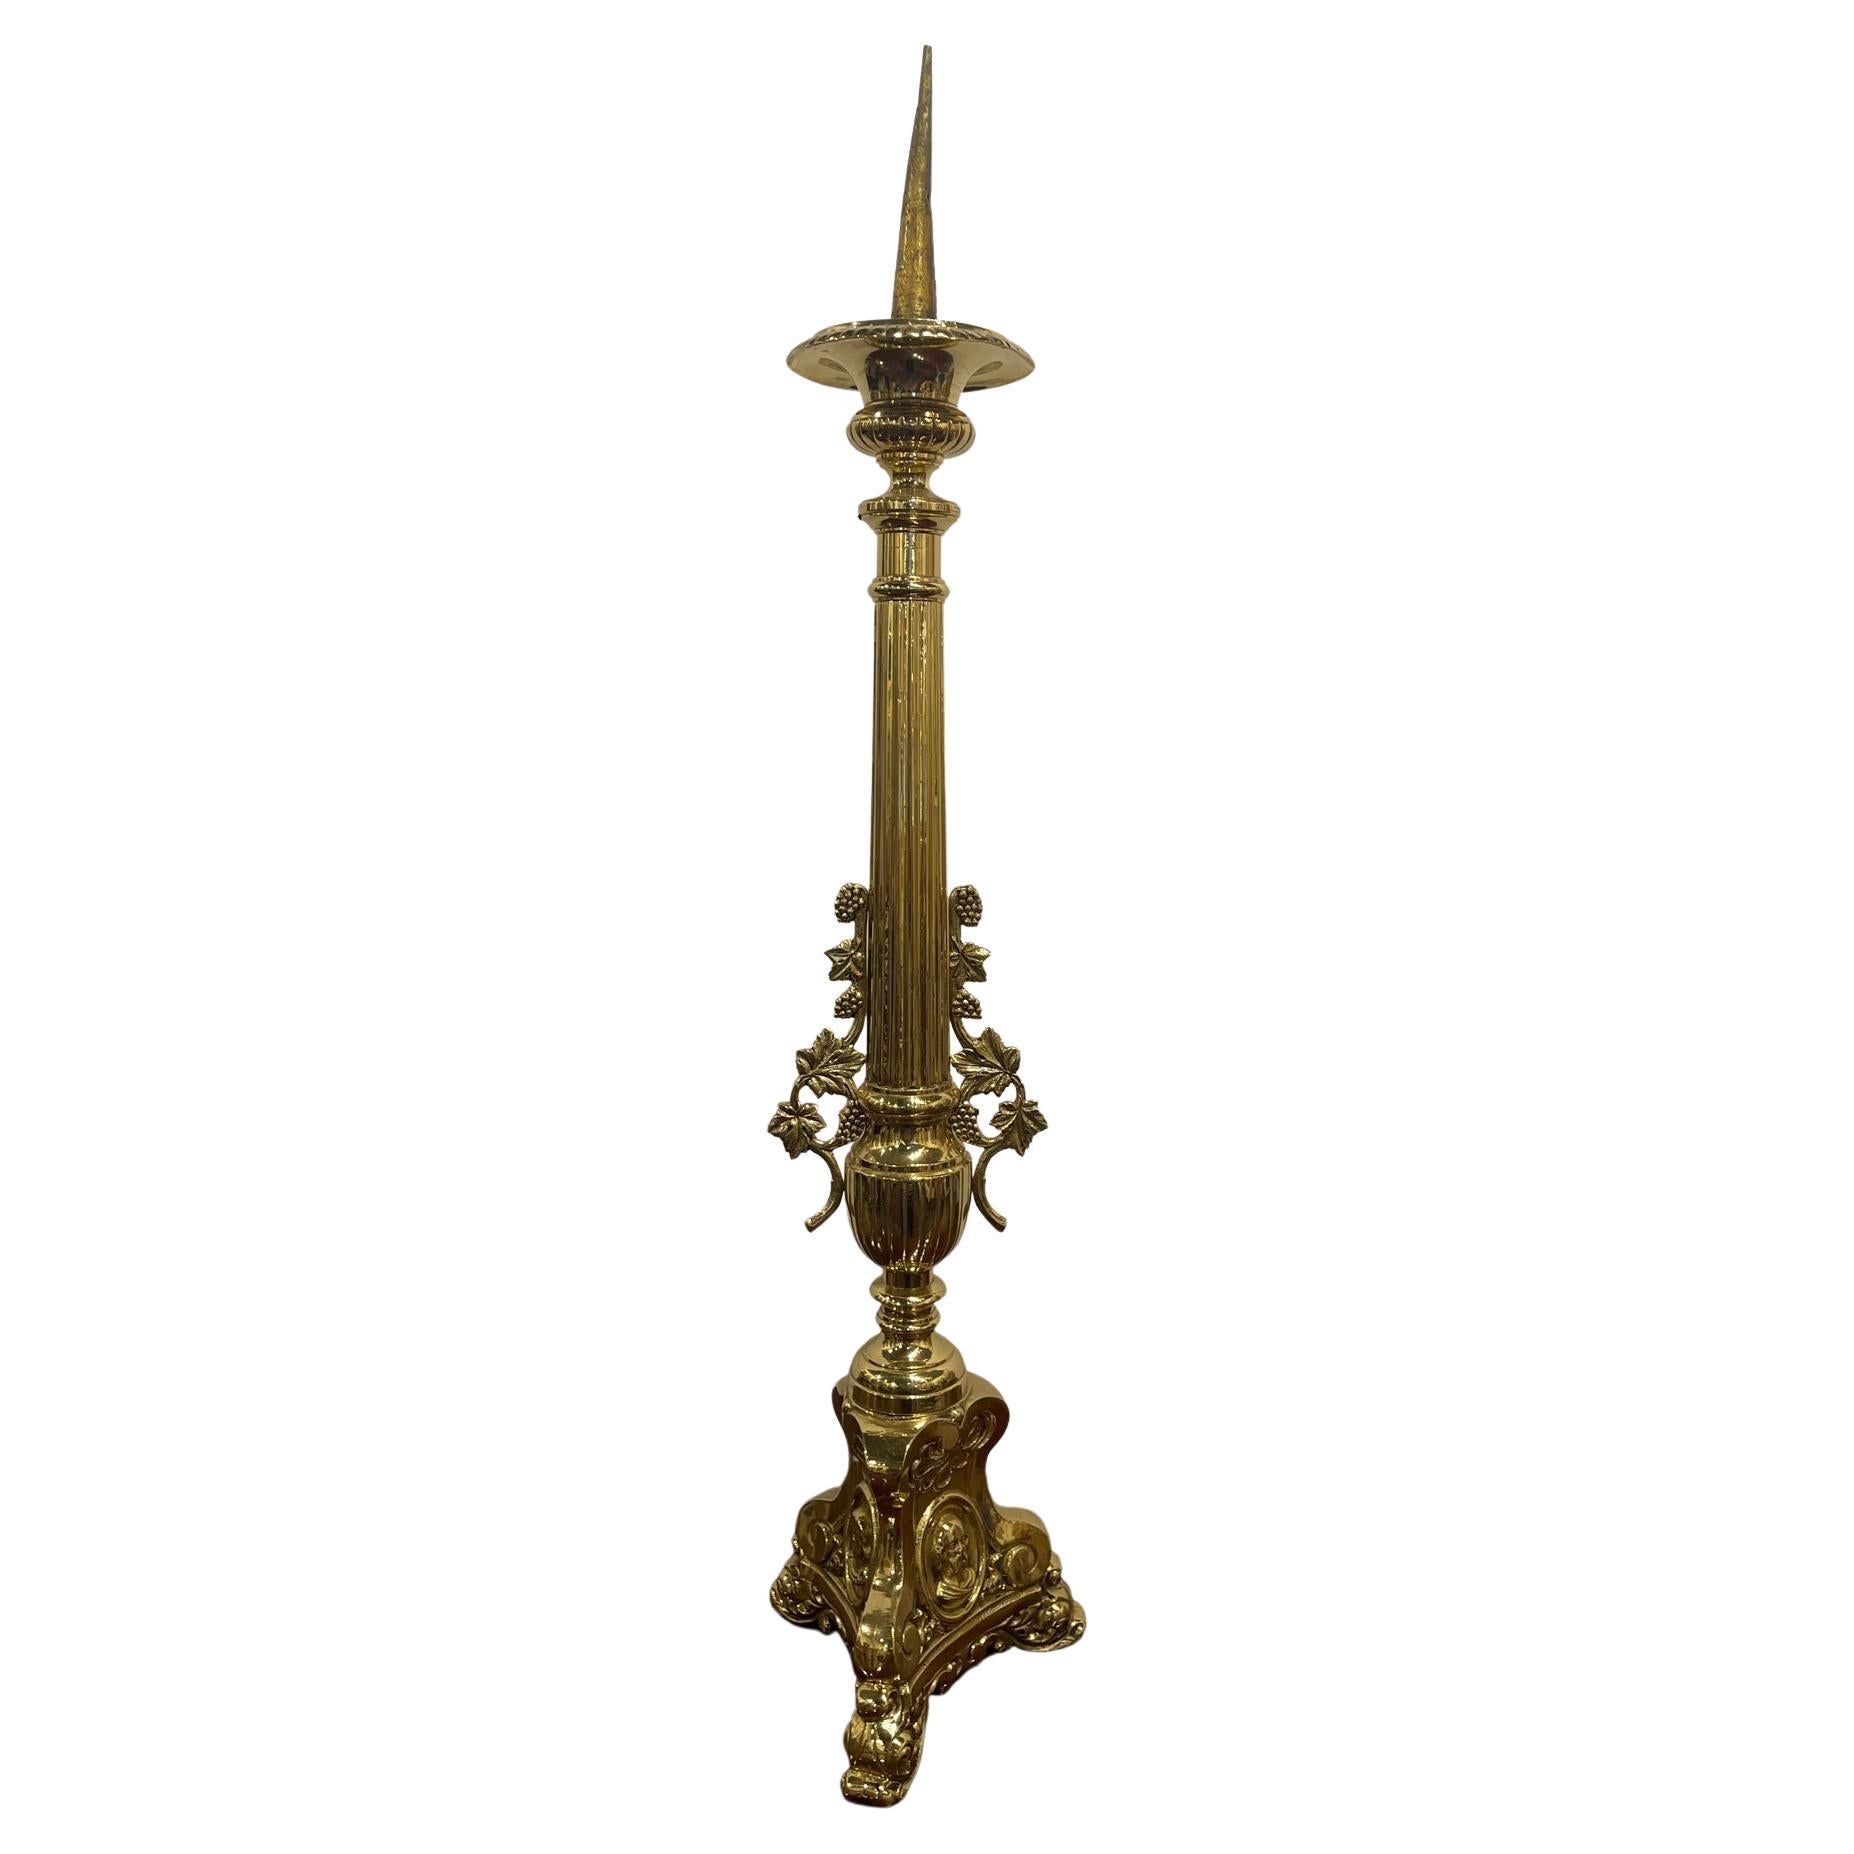 French Polished Brass Decorative Pricket or Candlestick, 19th Century For Sale